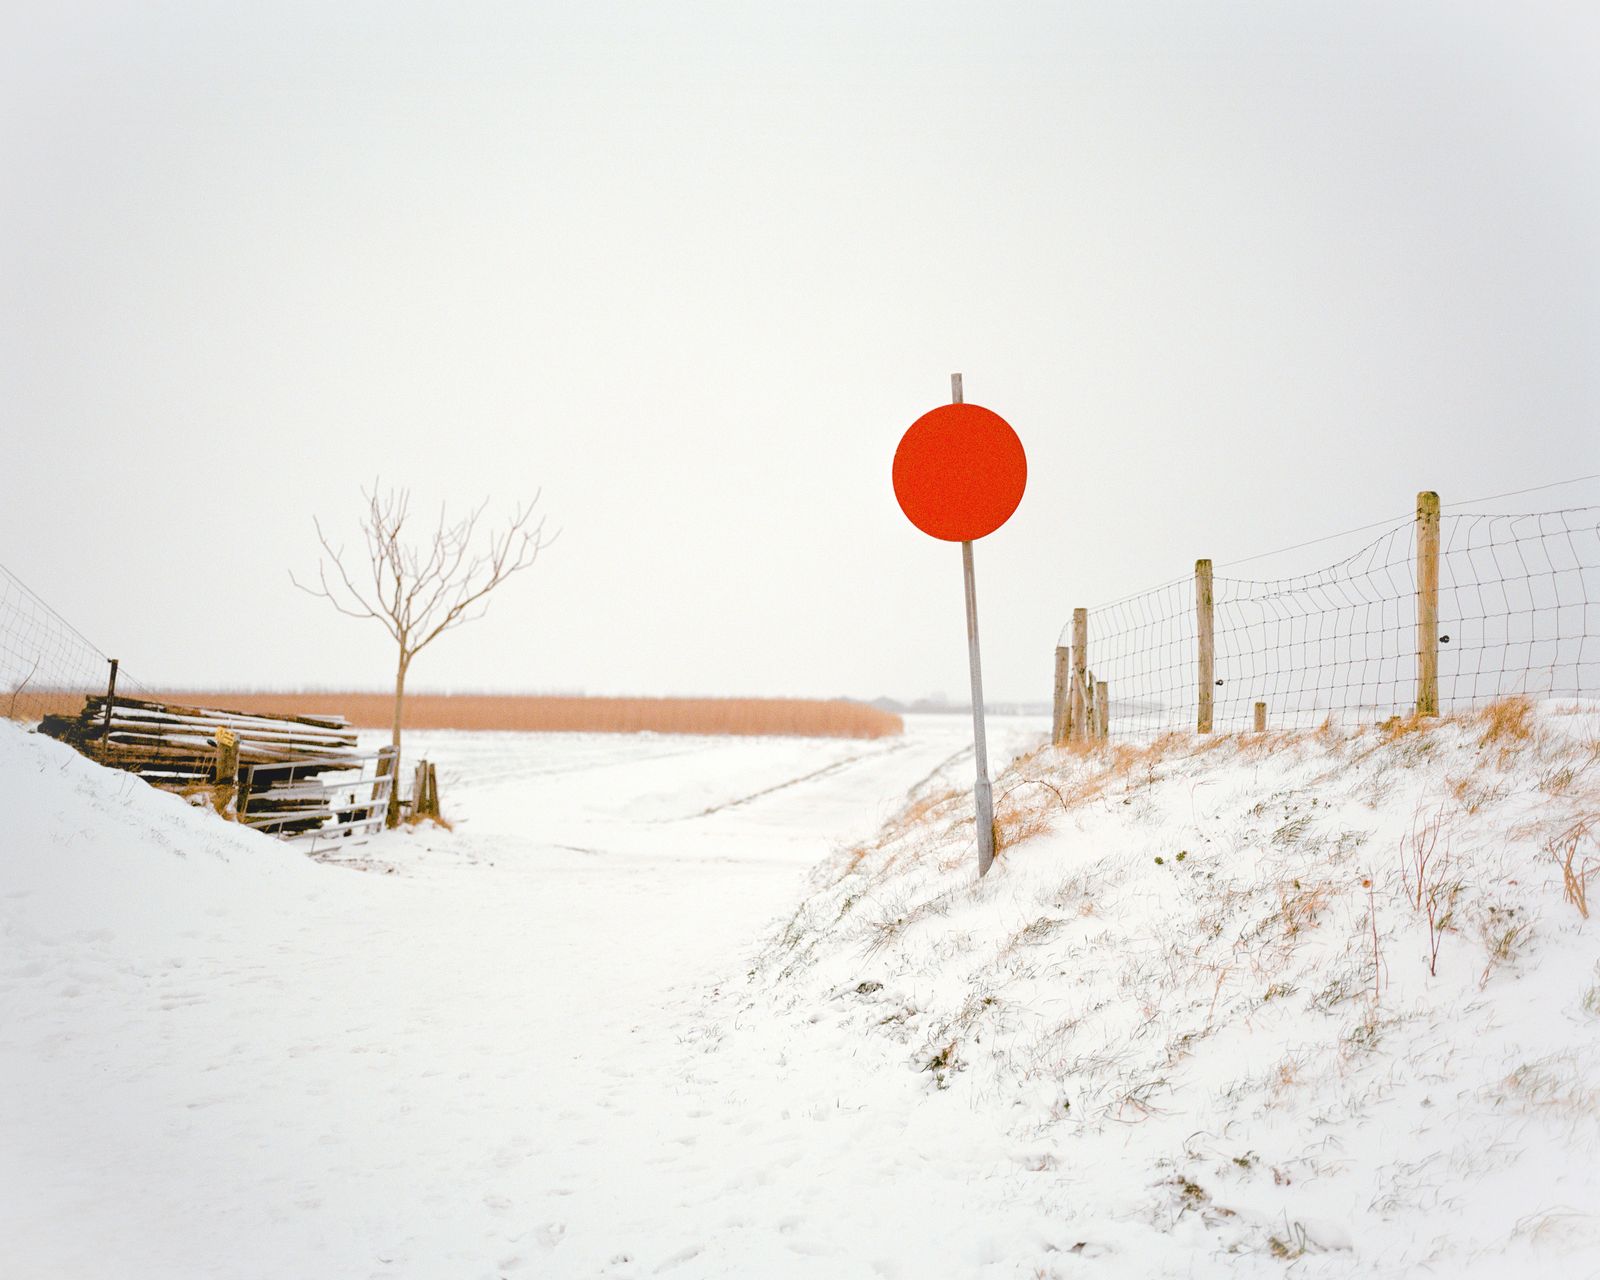 © Dominique de Vries - Image from the Now I know how to tell you, goodbye. photography project